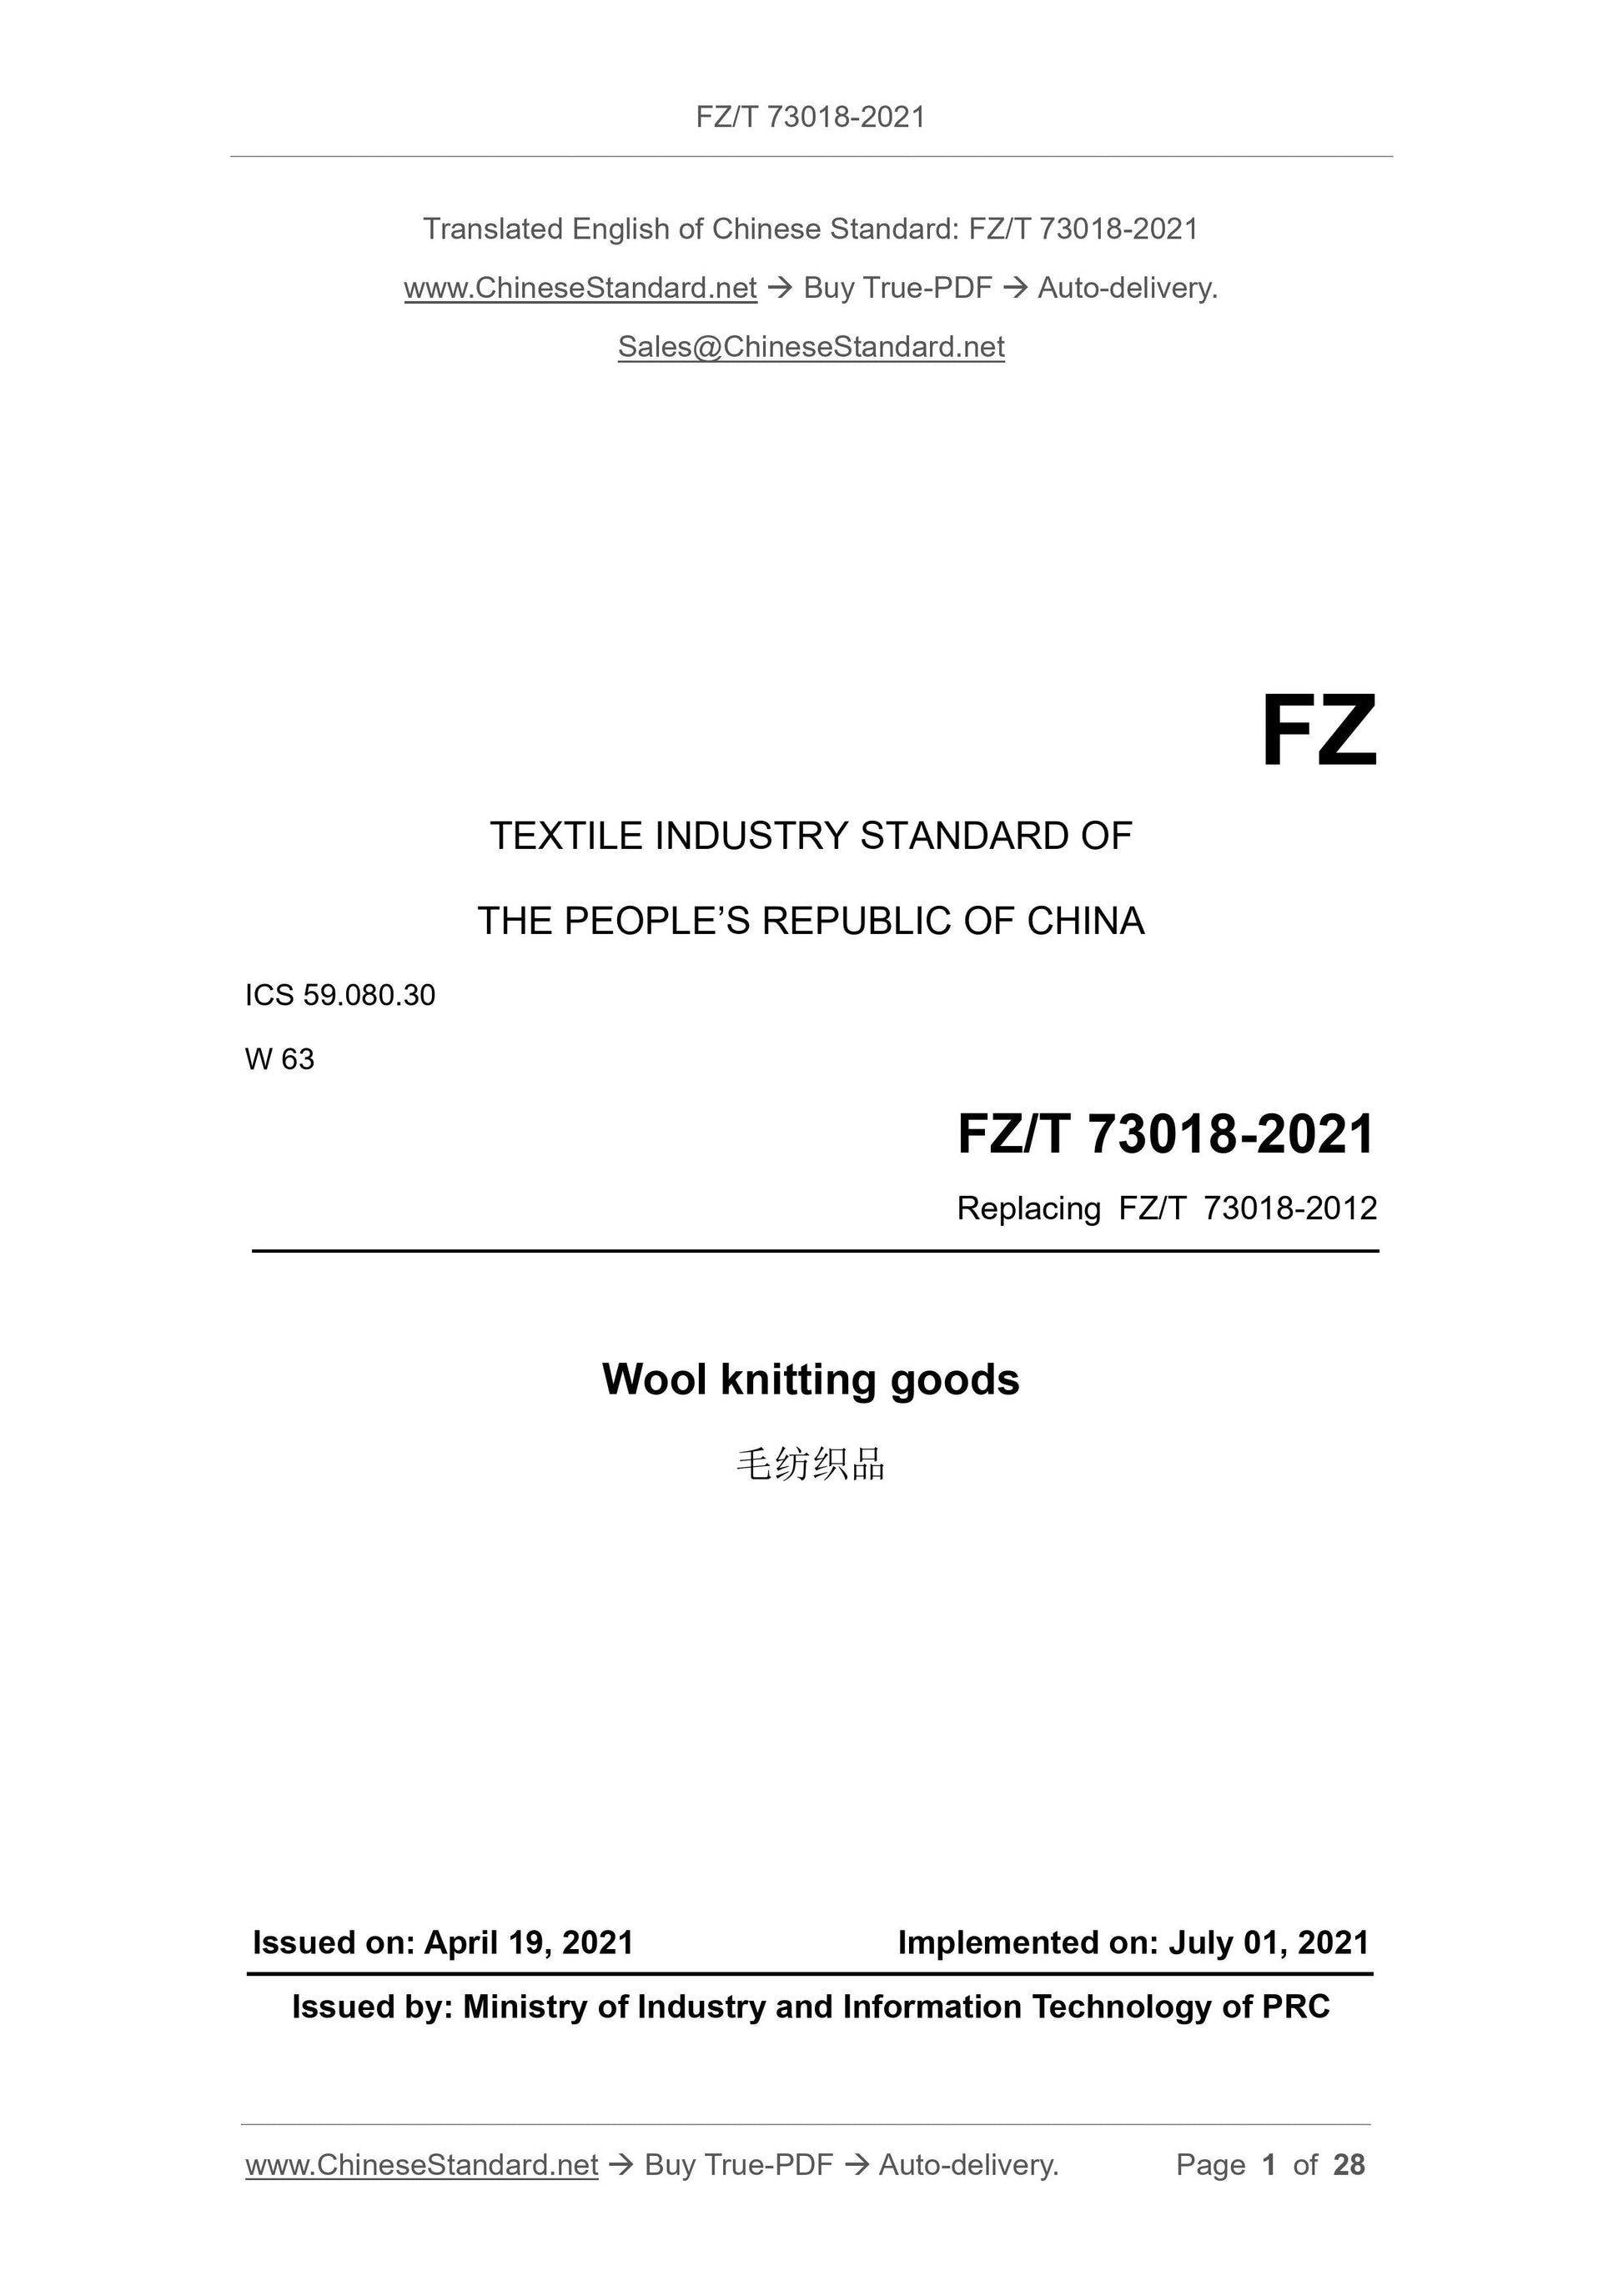 FZ/T 73018-2021 Page 1